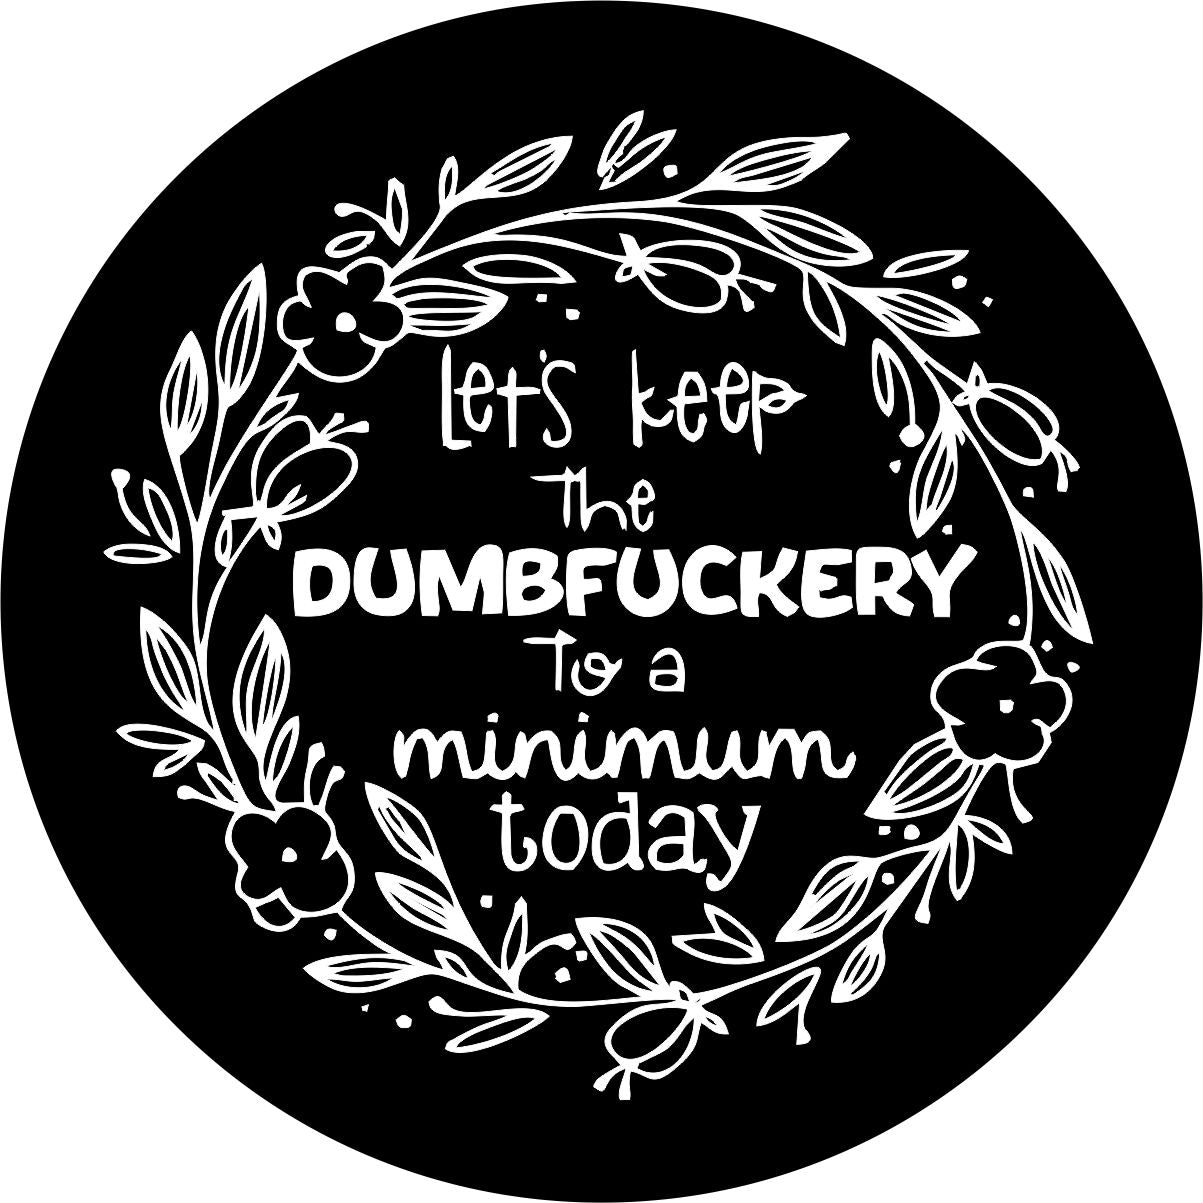 Funny and creative spare tire cover design with the saying "let's keep the dumbfuckery to a minimum today"